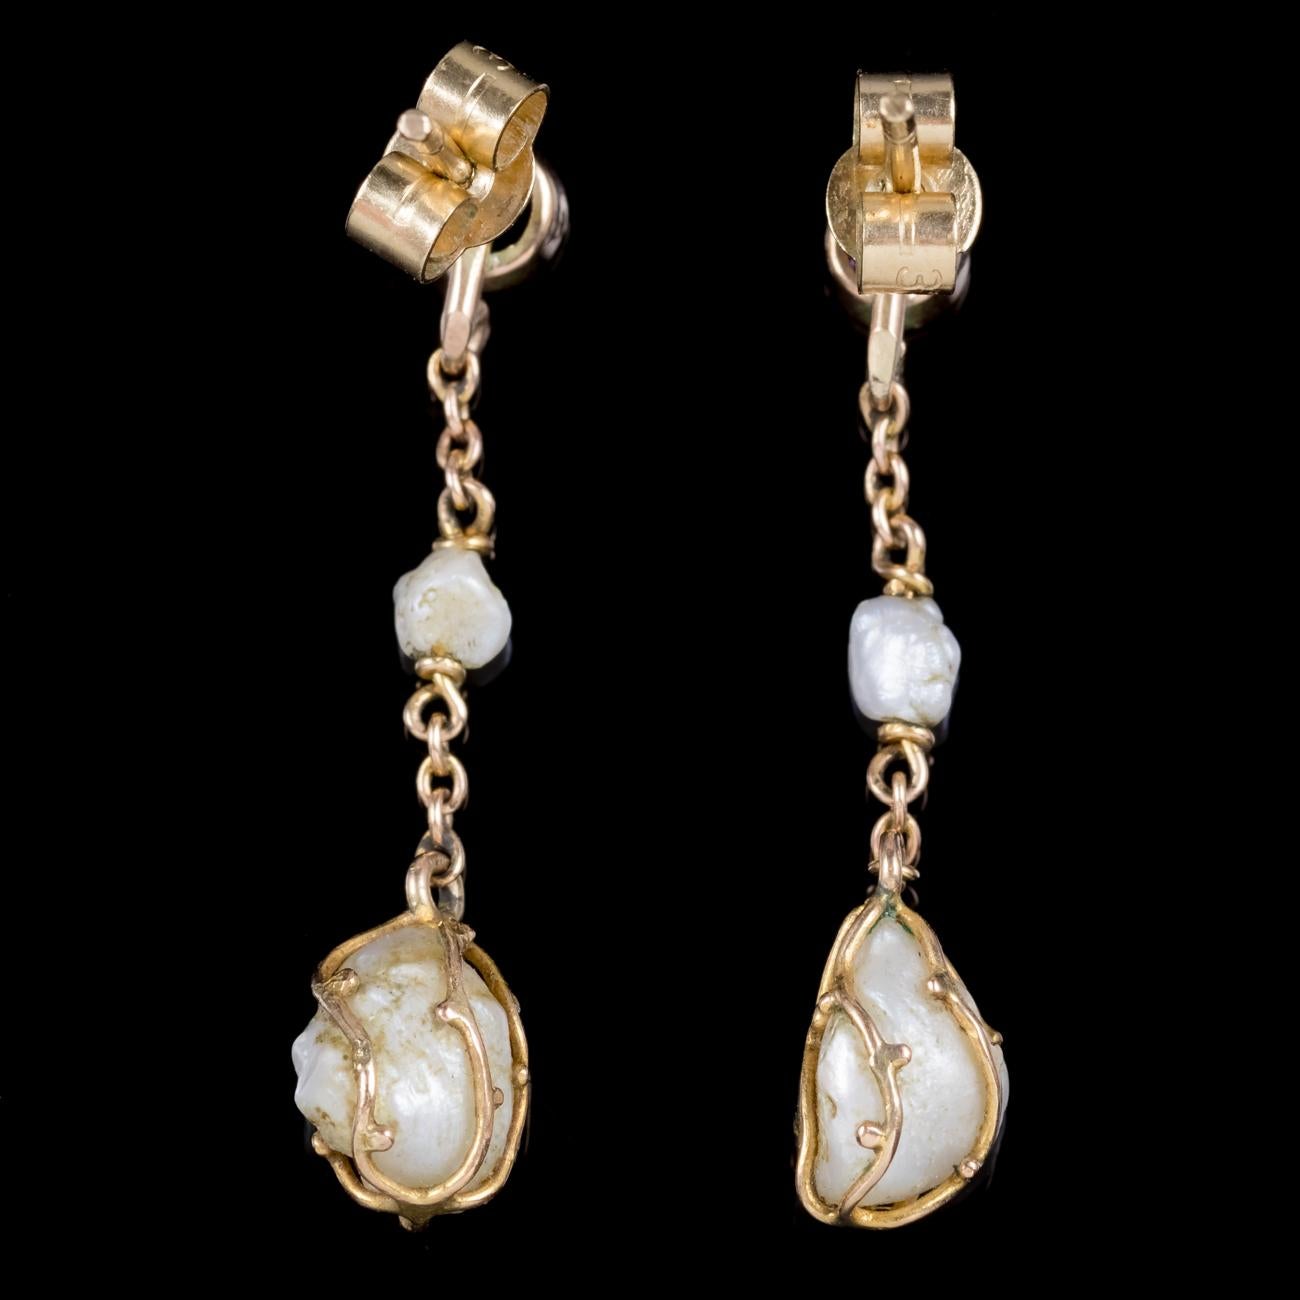 A fabulous pair of antique Victorian drop earrings featuring cage set Baroque Pearls hanging from a gold chain crowned with a 0.10ct Amethyst. Baroque Pearls have a wonderful lustre with a rich creamy tone and are unique for their irregular